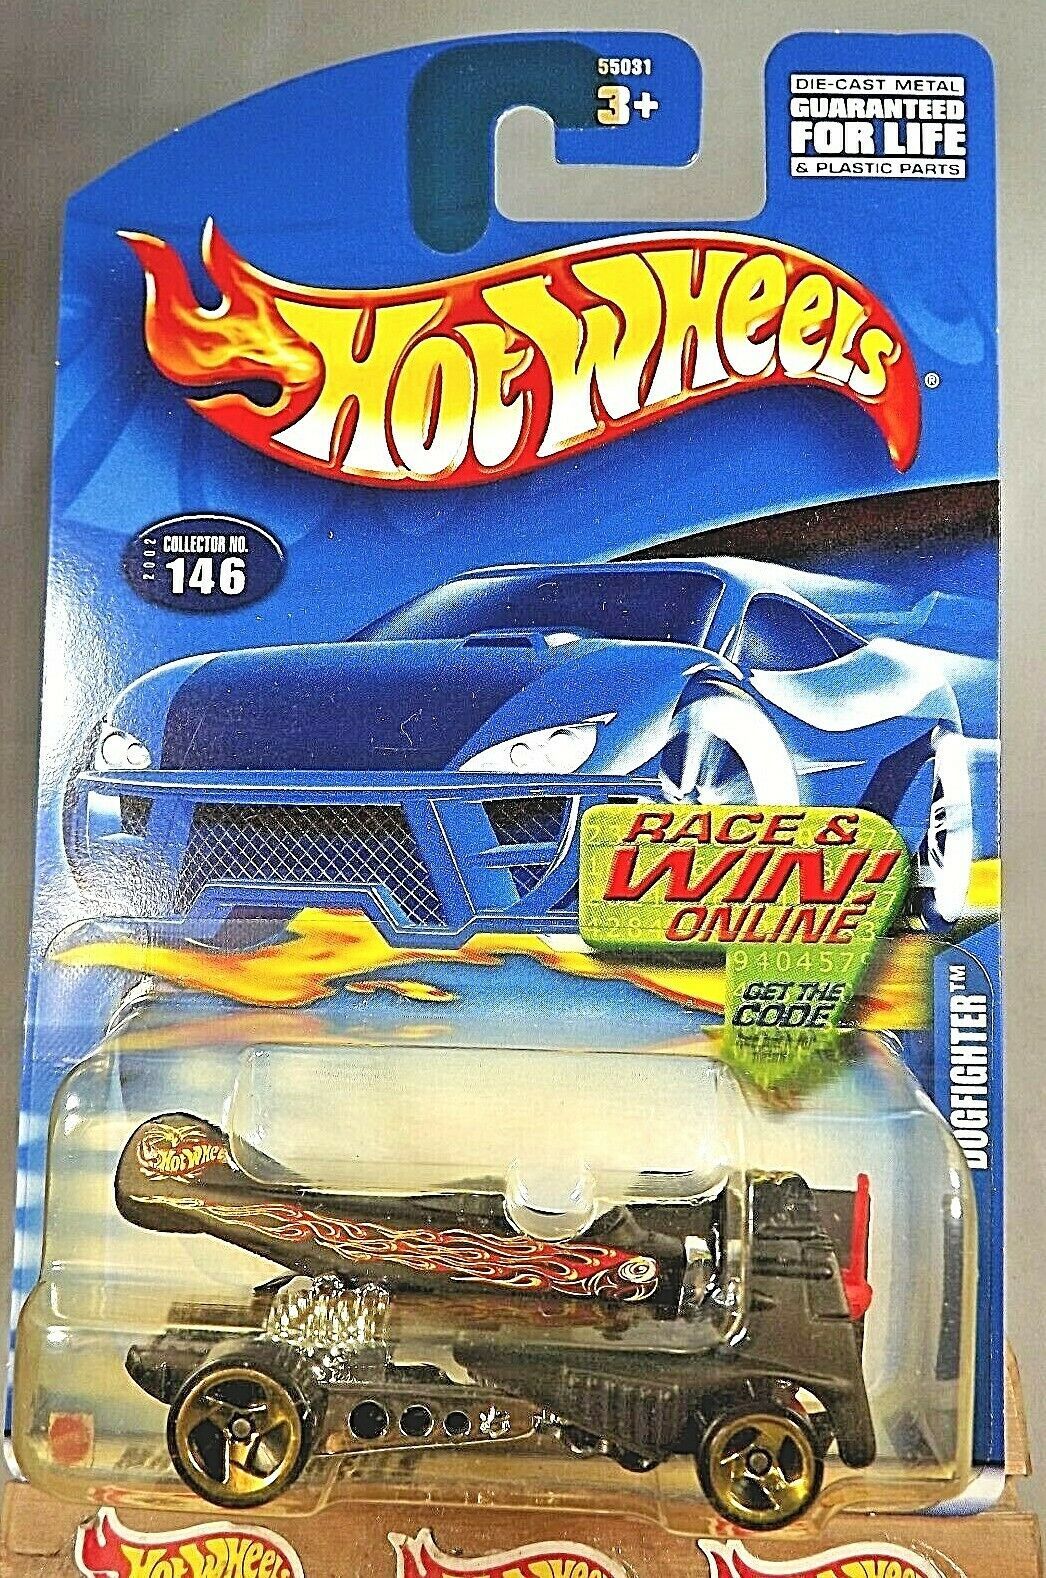 2002 Hot Wheels Collector #146 DOGFIGHTER Flat Black w/Gold 3 Spoke Wheels